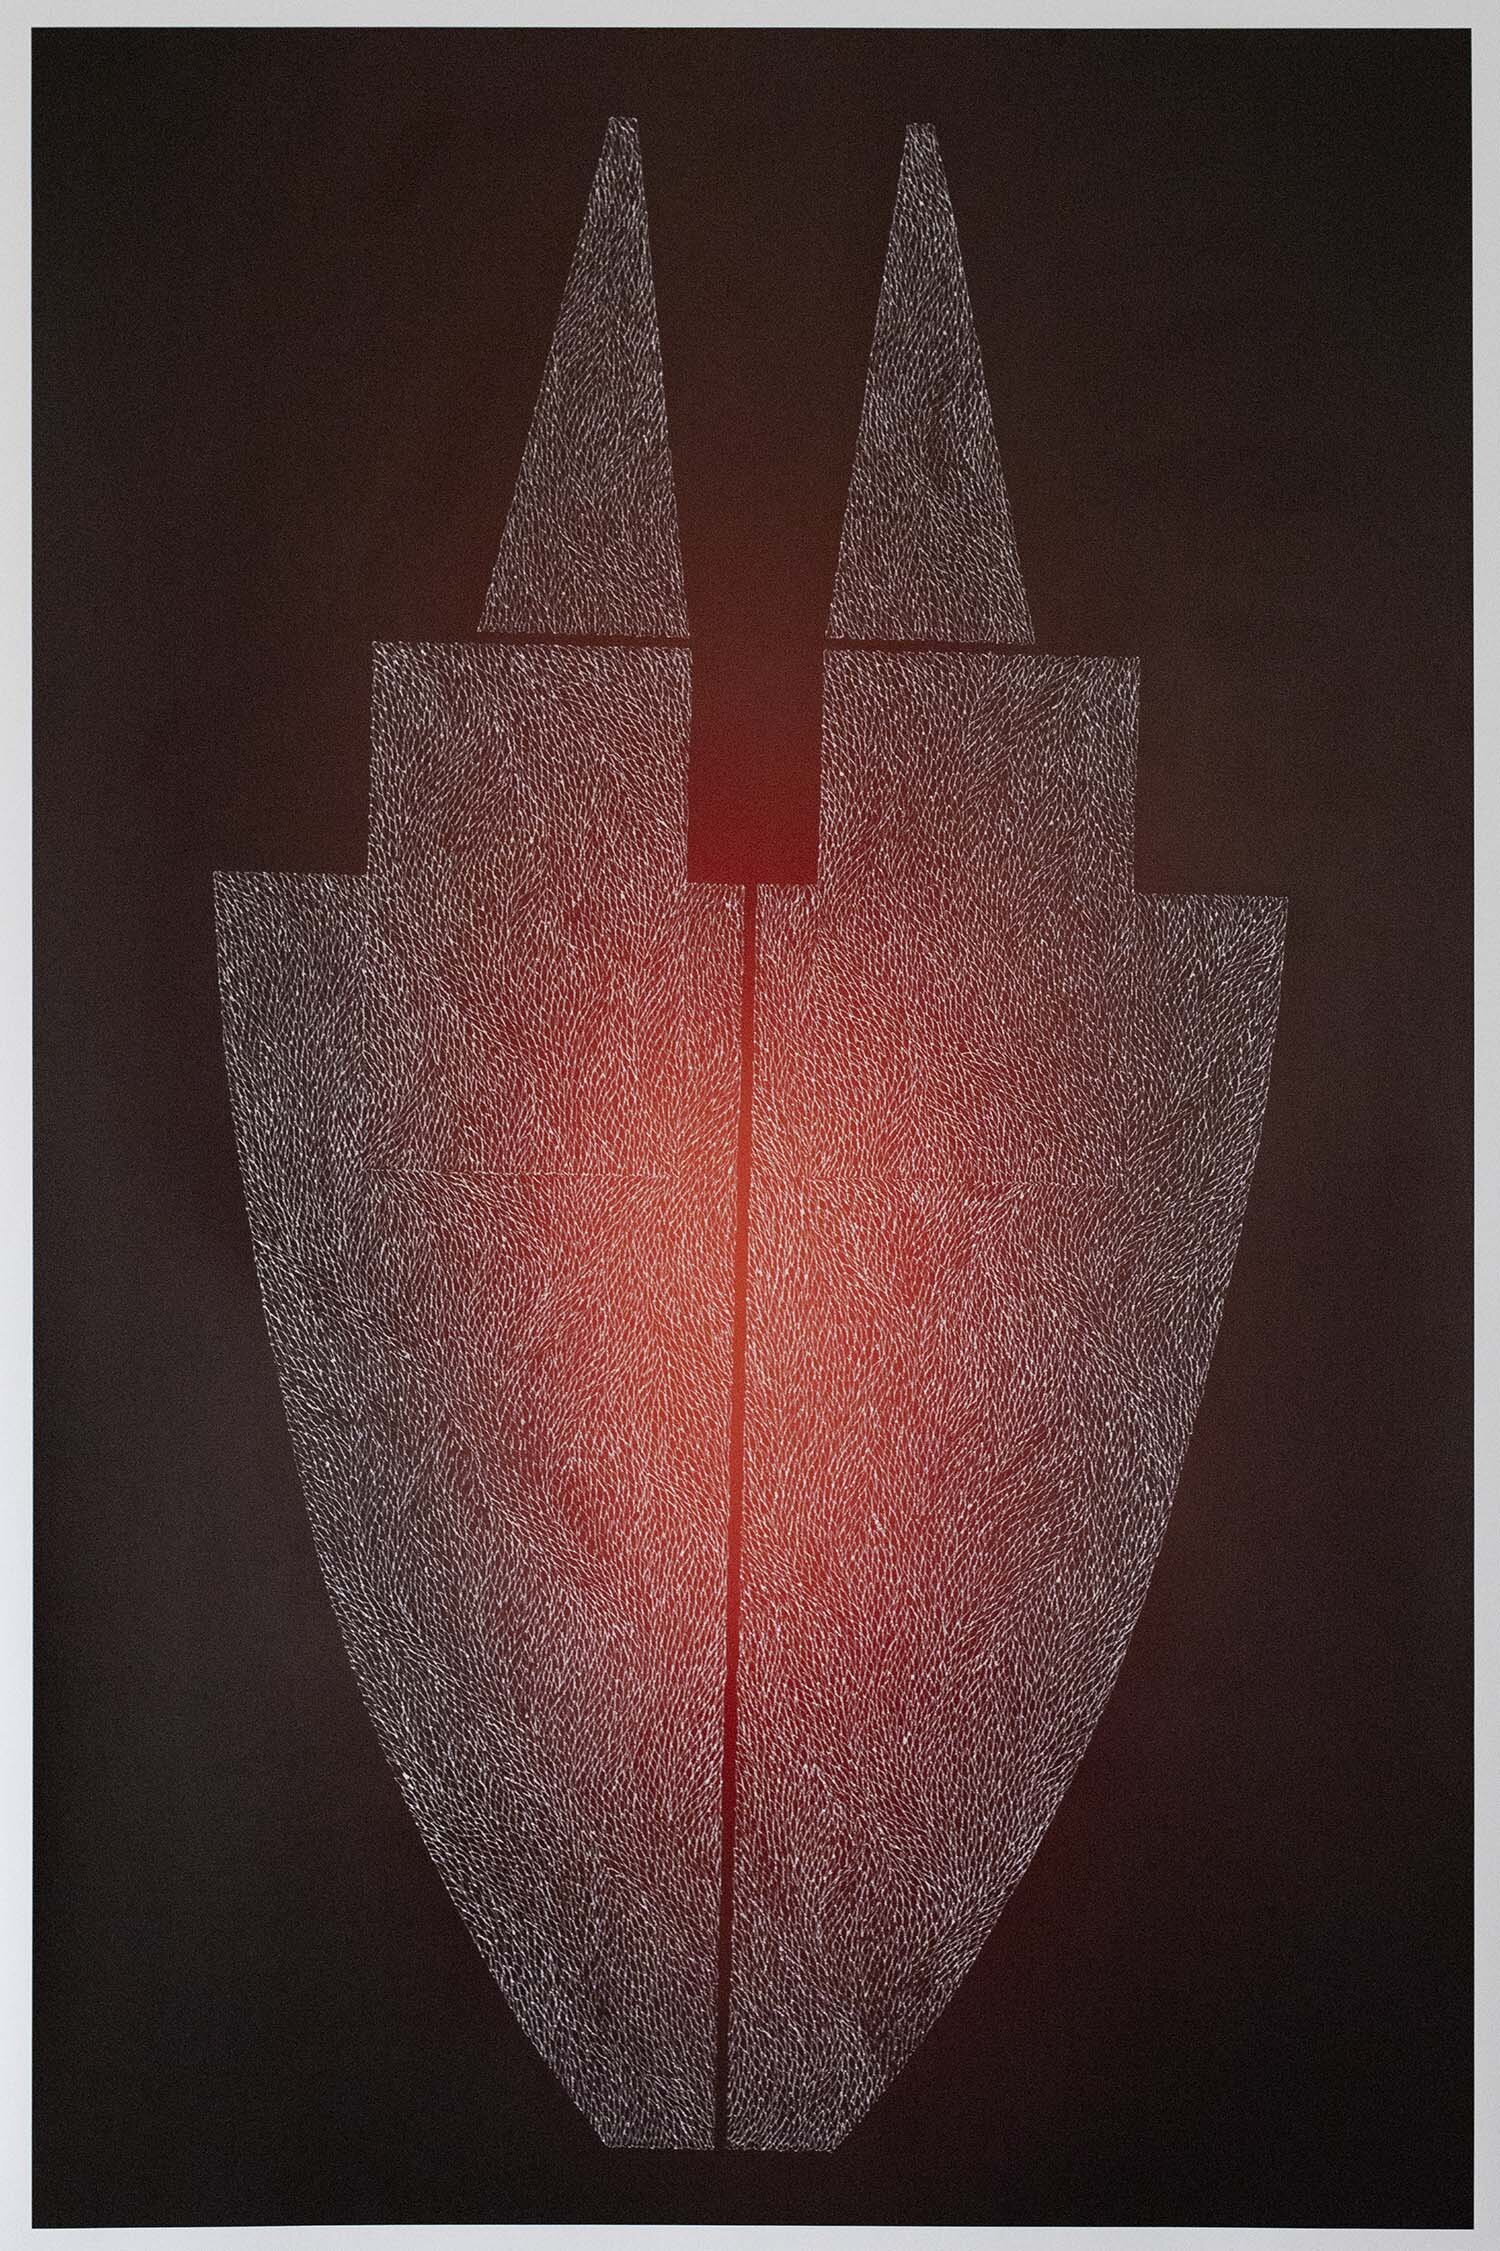   Red #2  41.5x27.5 inches 2019 x-acto blade etching on hahnemuhle rag paper   